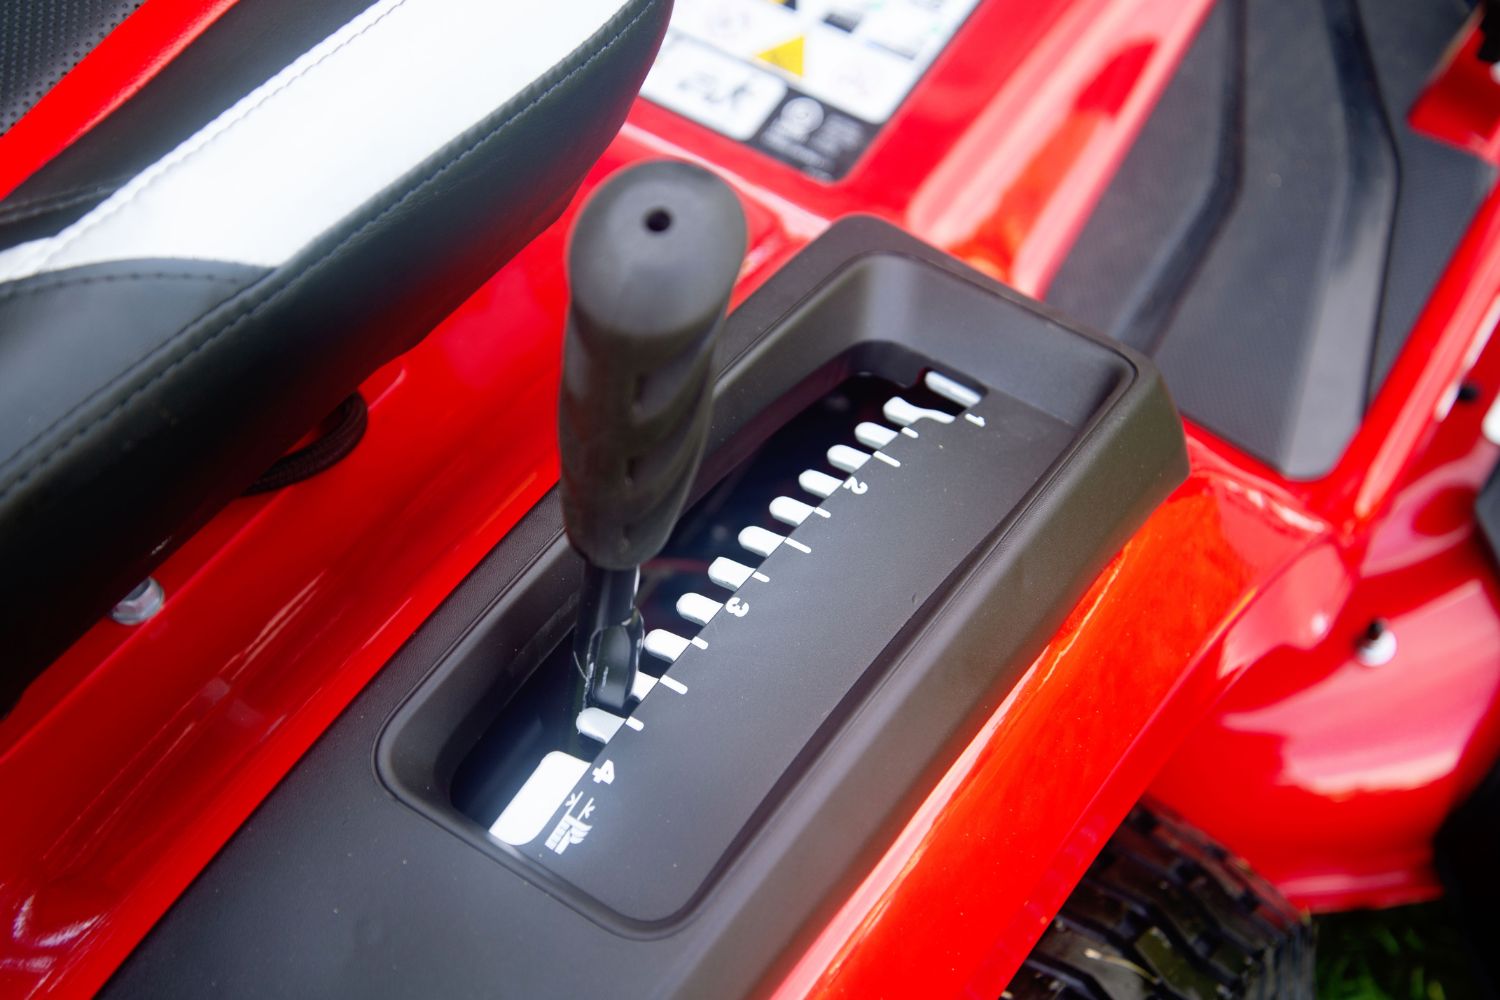 A close-up of the controls on the Craftsman Battery riding mower